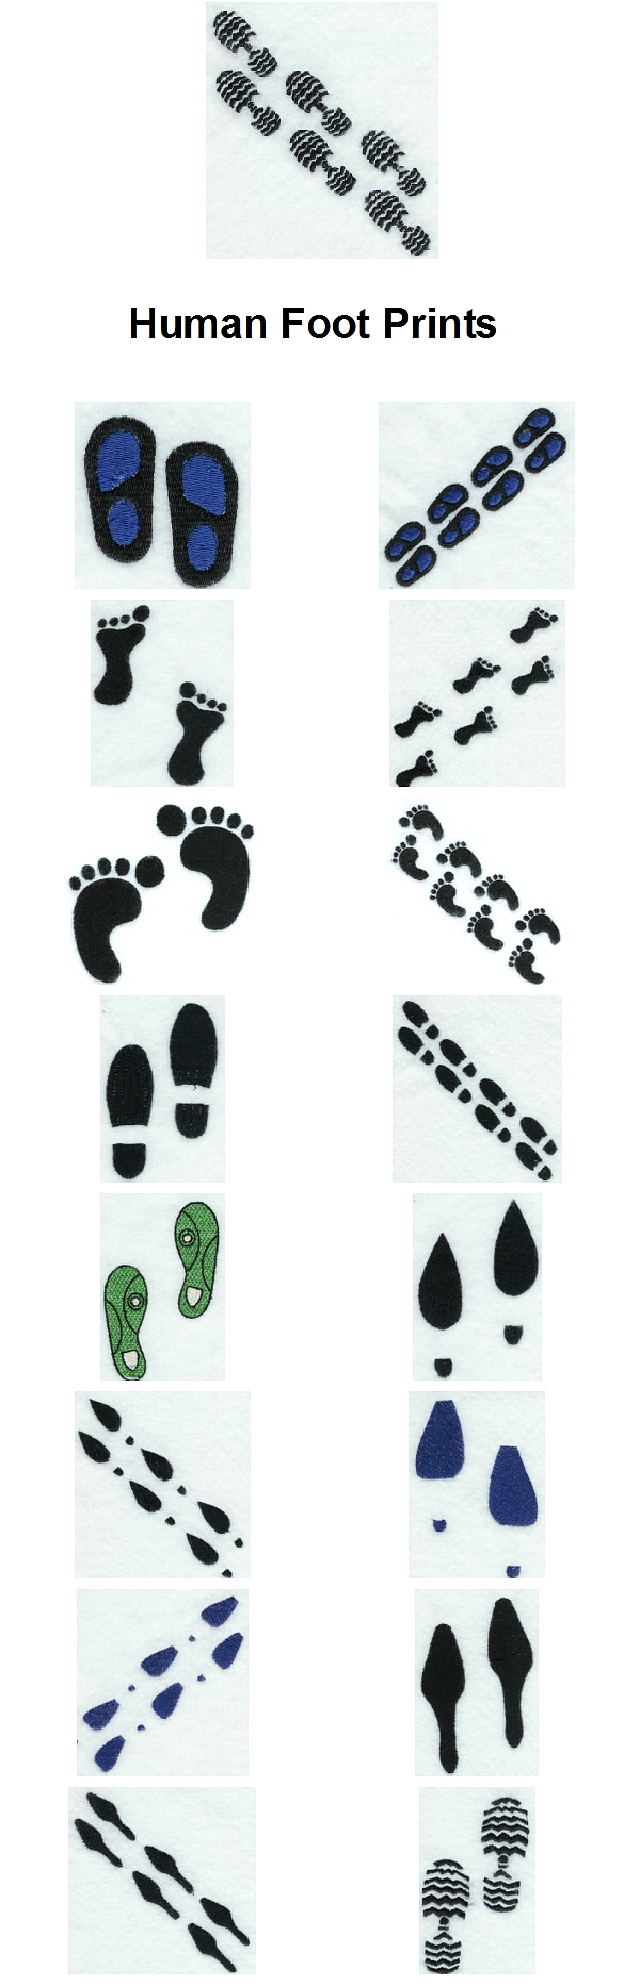 Human Foot Prints Embroidery Machine Design Details